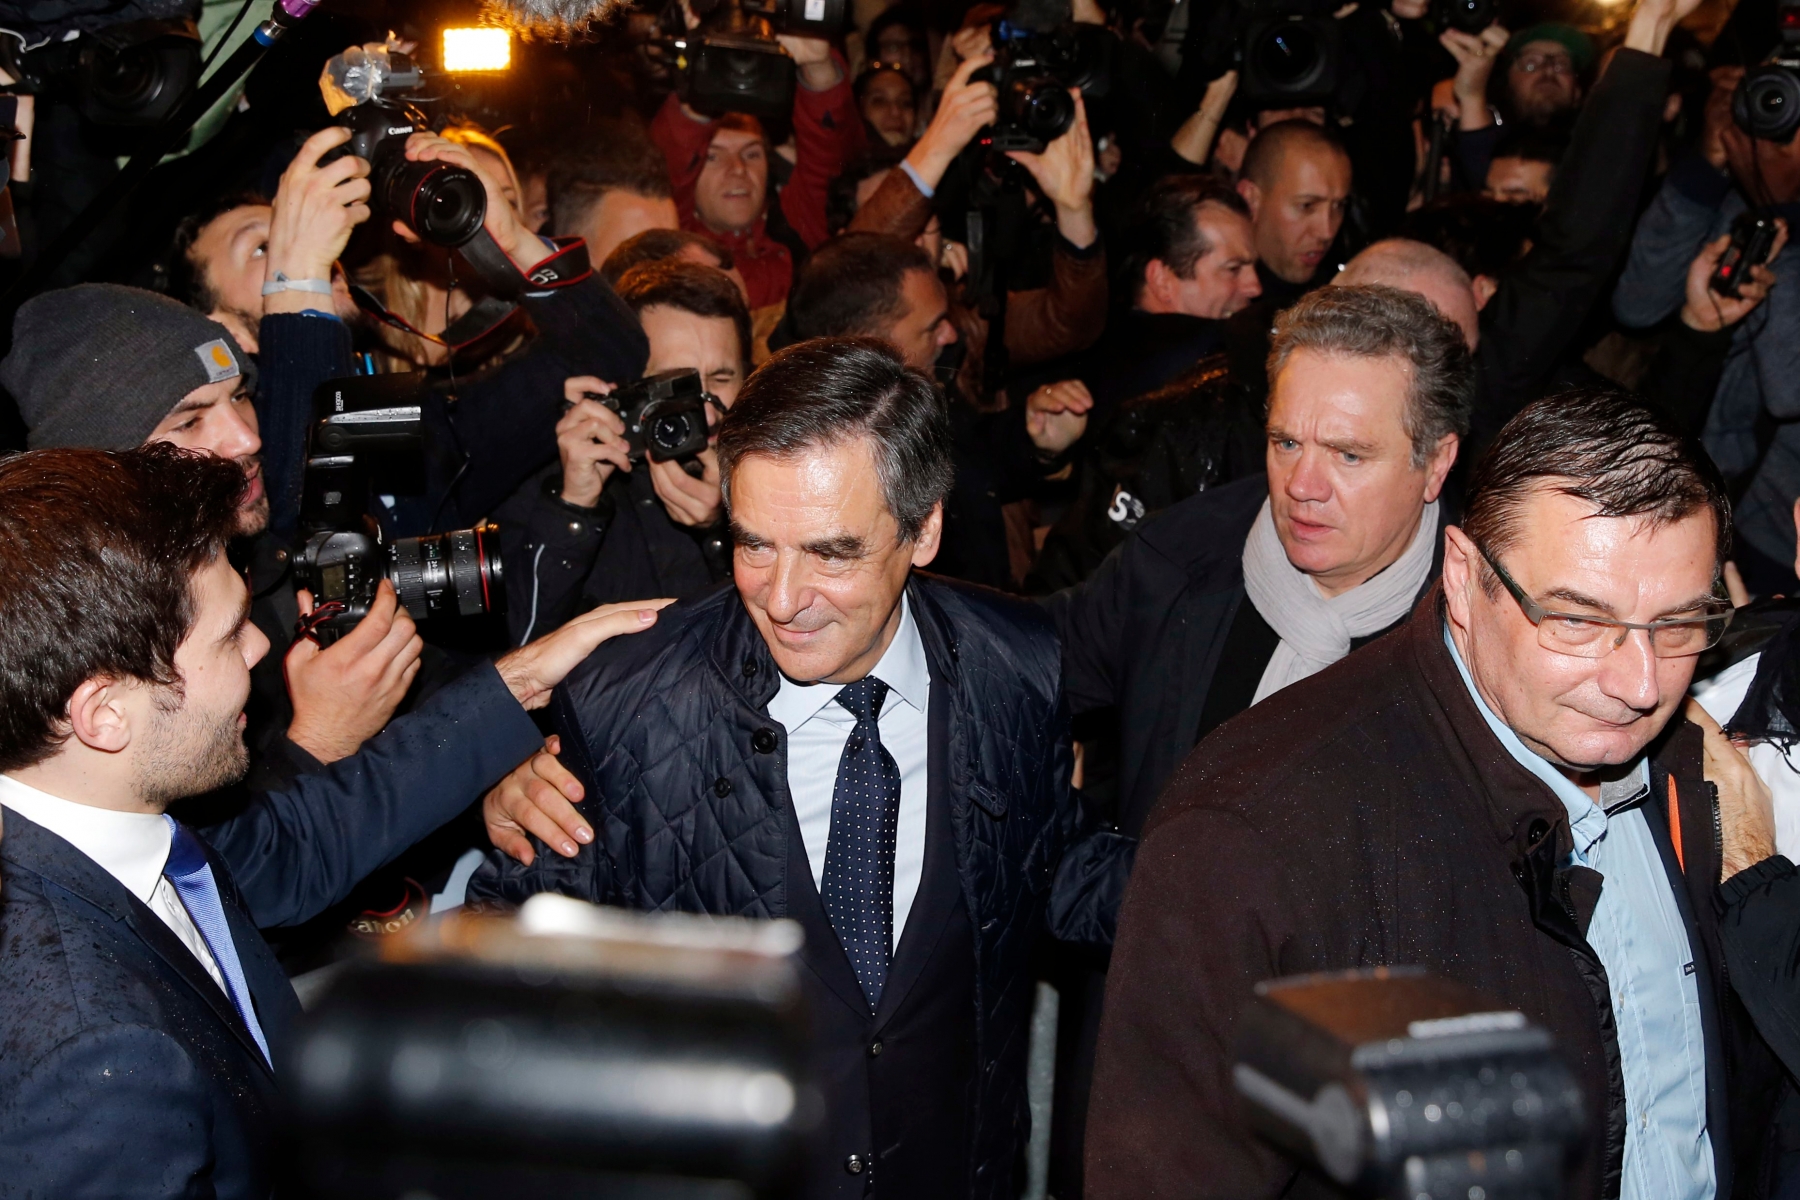 Candidate for the right-wing Les Republicains (LR) party primaries ahead of the 2017 presidential election and former French prime minister, Francois Fillon, center left, arrives at his campaign headquarters after the vote's first round, on November 20, 2016 in Paris. on Sunday, Nov. 20, 2016. Francois Fillon had the largest share of votes in early returns Sunday from the first round of the conservative primary for next year's presidential election. (Gonzalo Fuentes/Pool Photo via AP) France Election